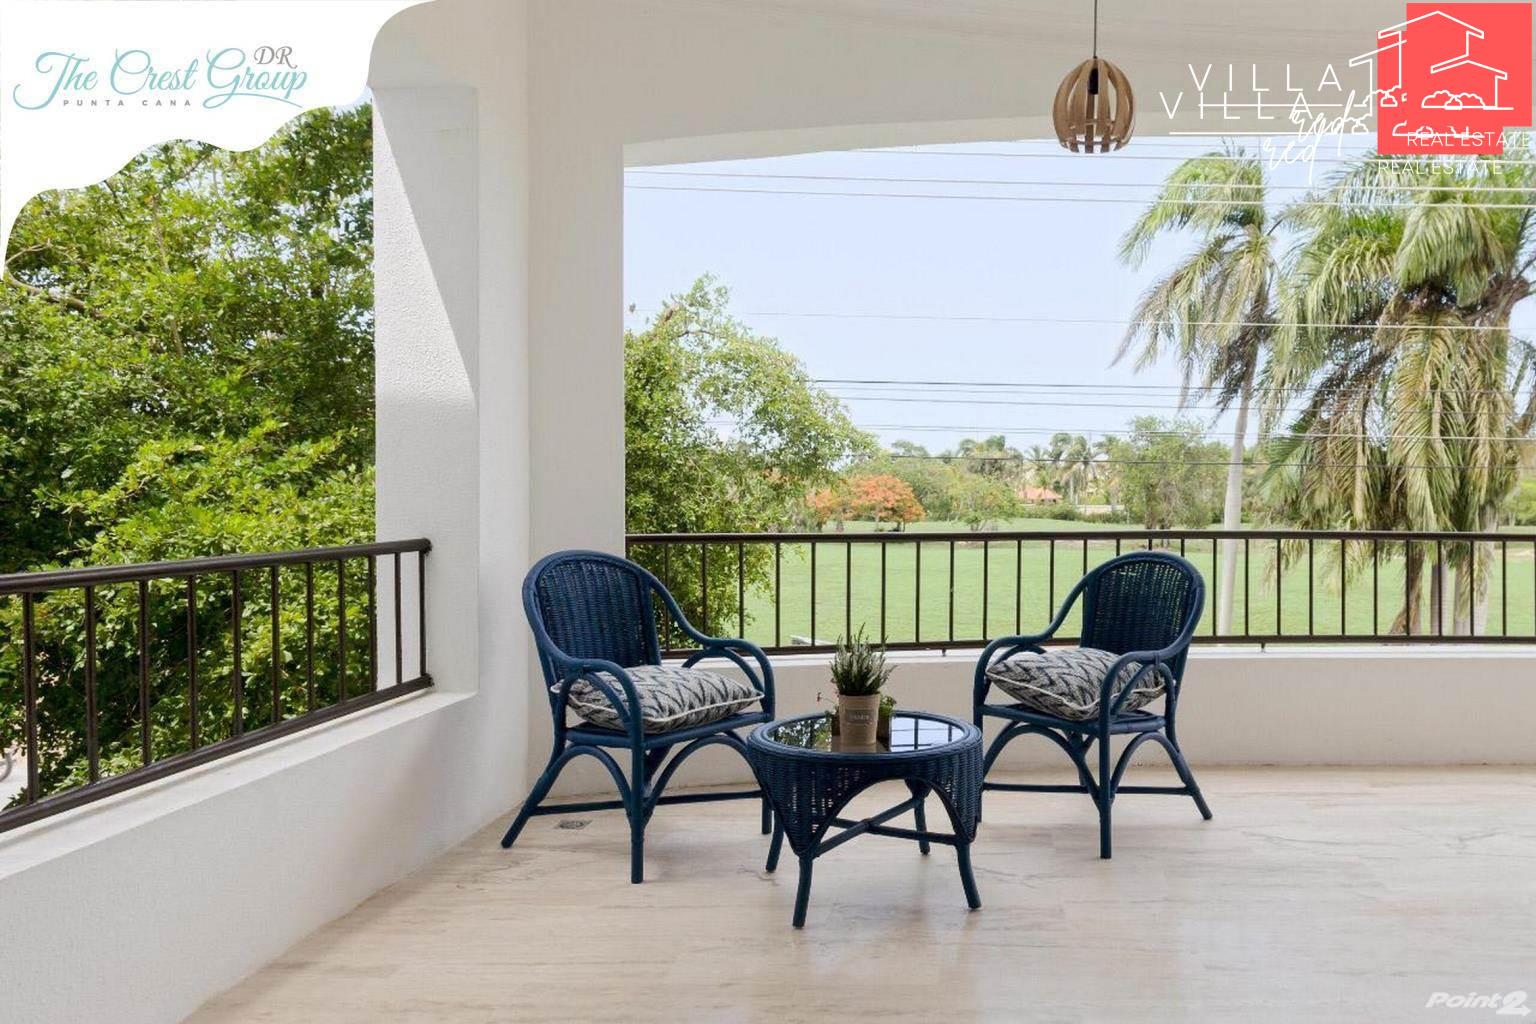 Villa.red Incredible Two Bedroom Apartment With Spacious Terrace And Golf Views https://villa.red/property/incredible-two-bedroom-apartment-with-spacious-terrace-and-golf-views